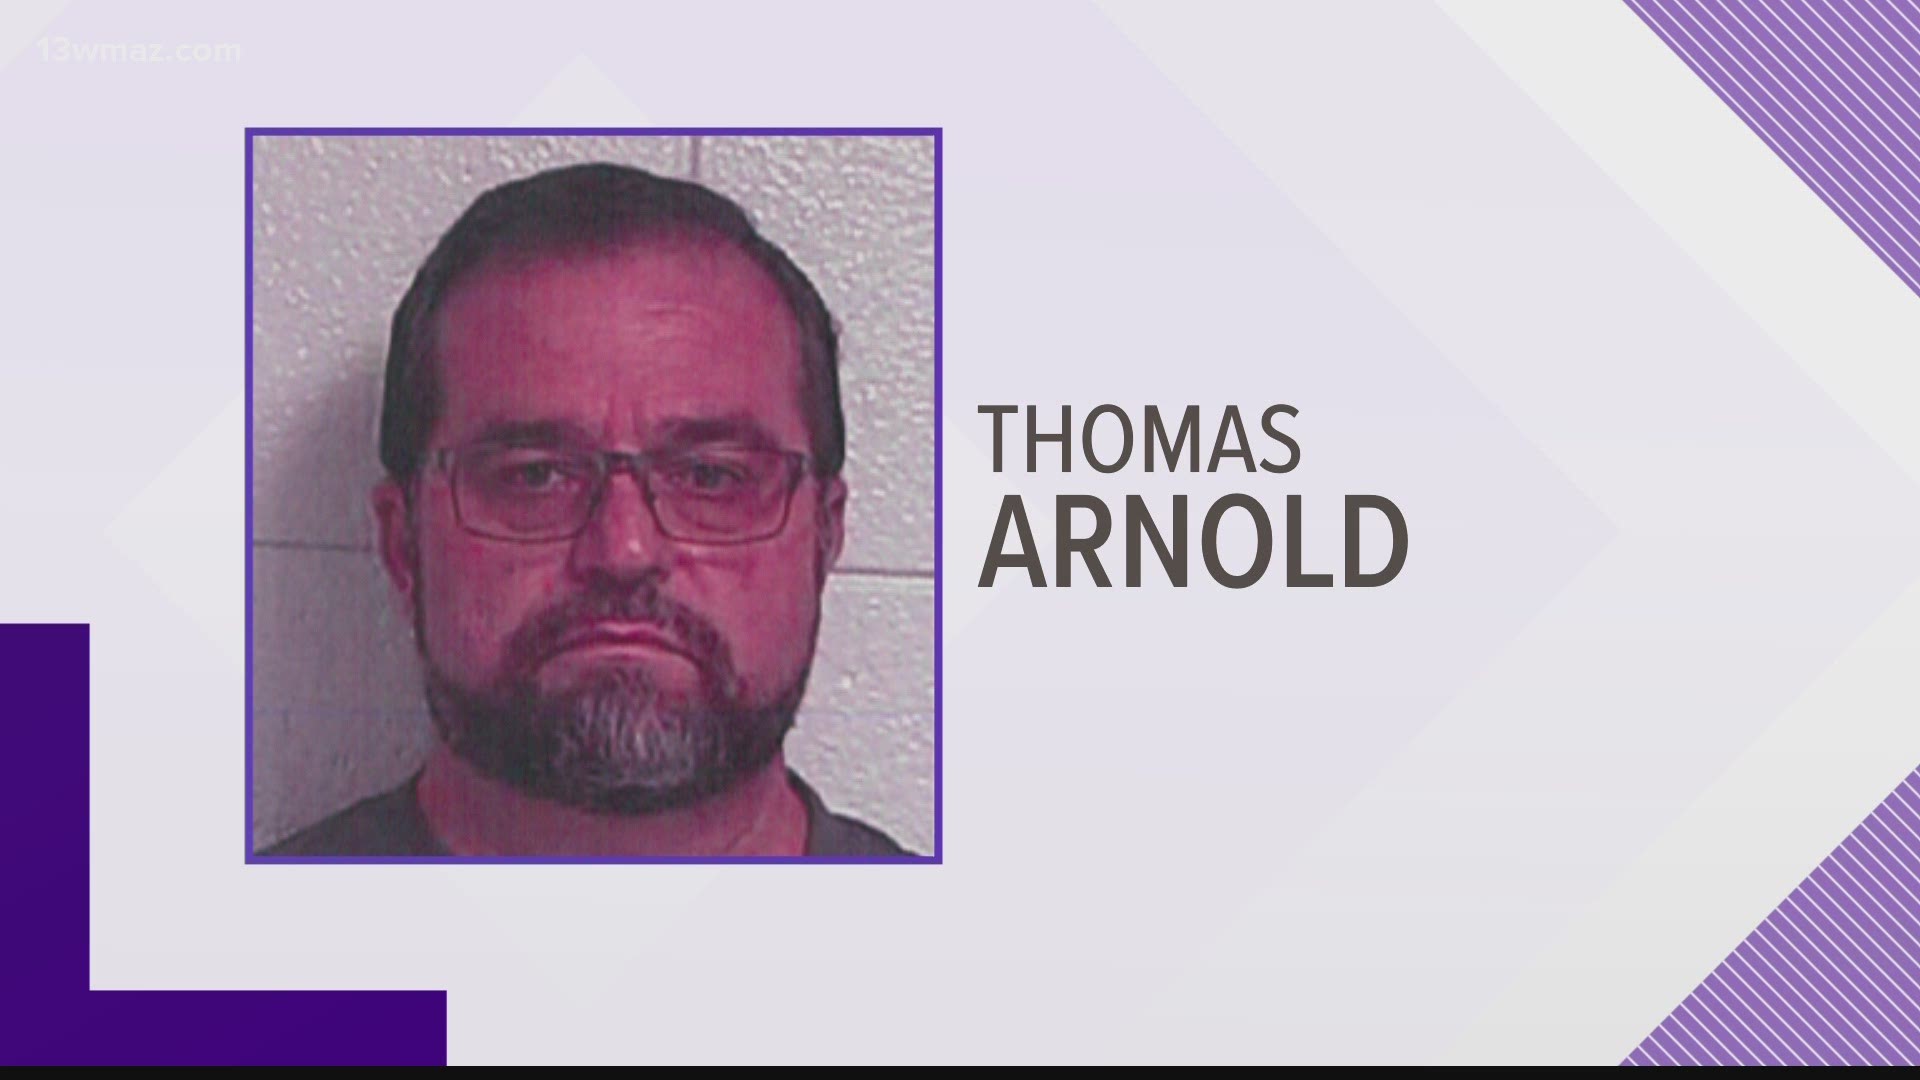 55-year-old Thomas Christopher Arnold faces a charge of child molestation after he allegedly sent explicit photos to a teen.